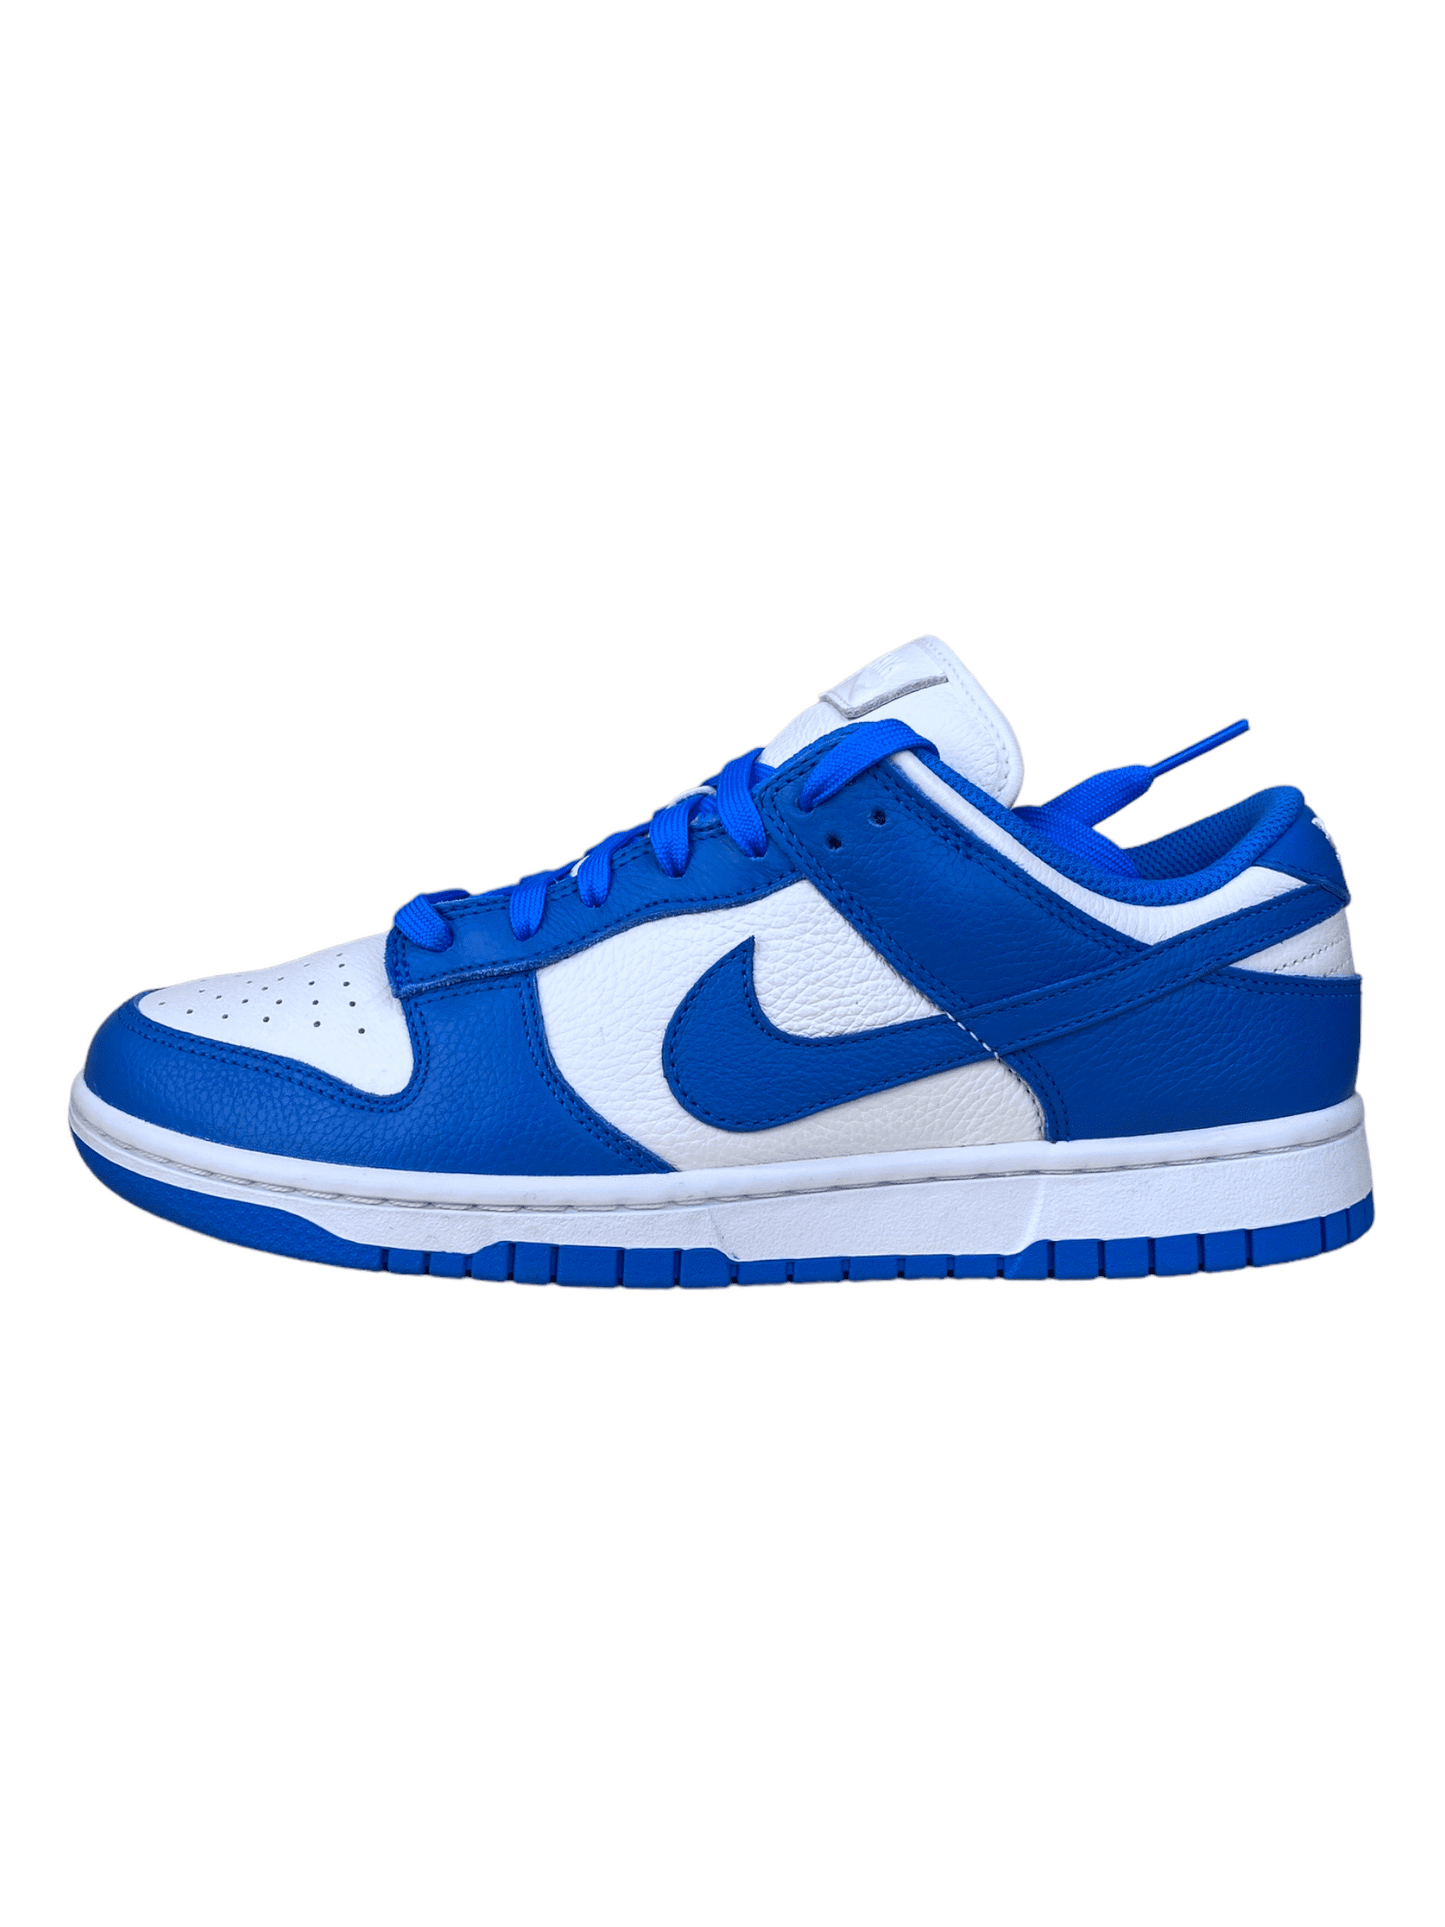 Nike Dunk Low Kentucky Sneakers - Genuine Design Luxury Consignment for Men. New & Pre-Owned Clothing, Shoes, & Accessories. Calgary, Canada